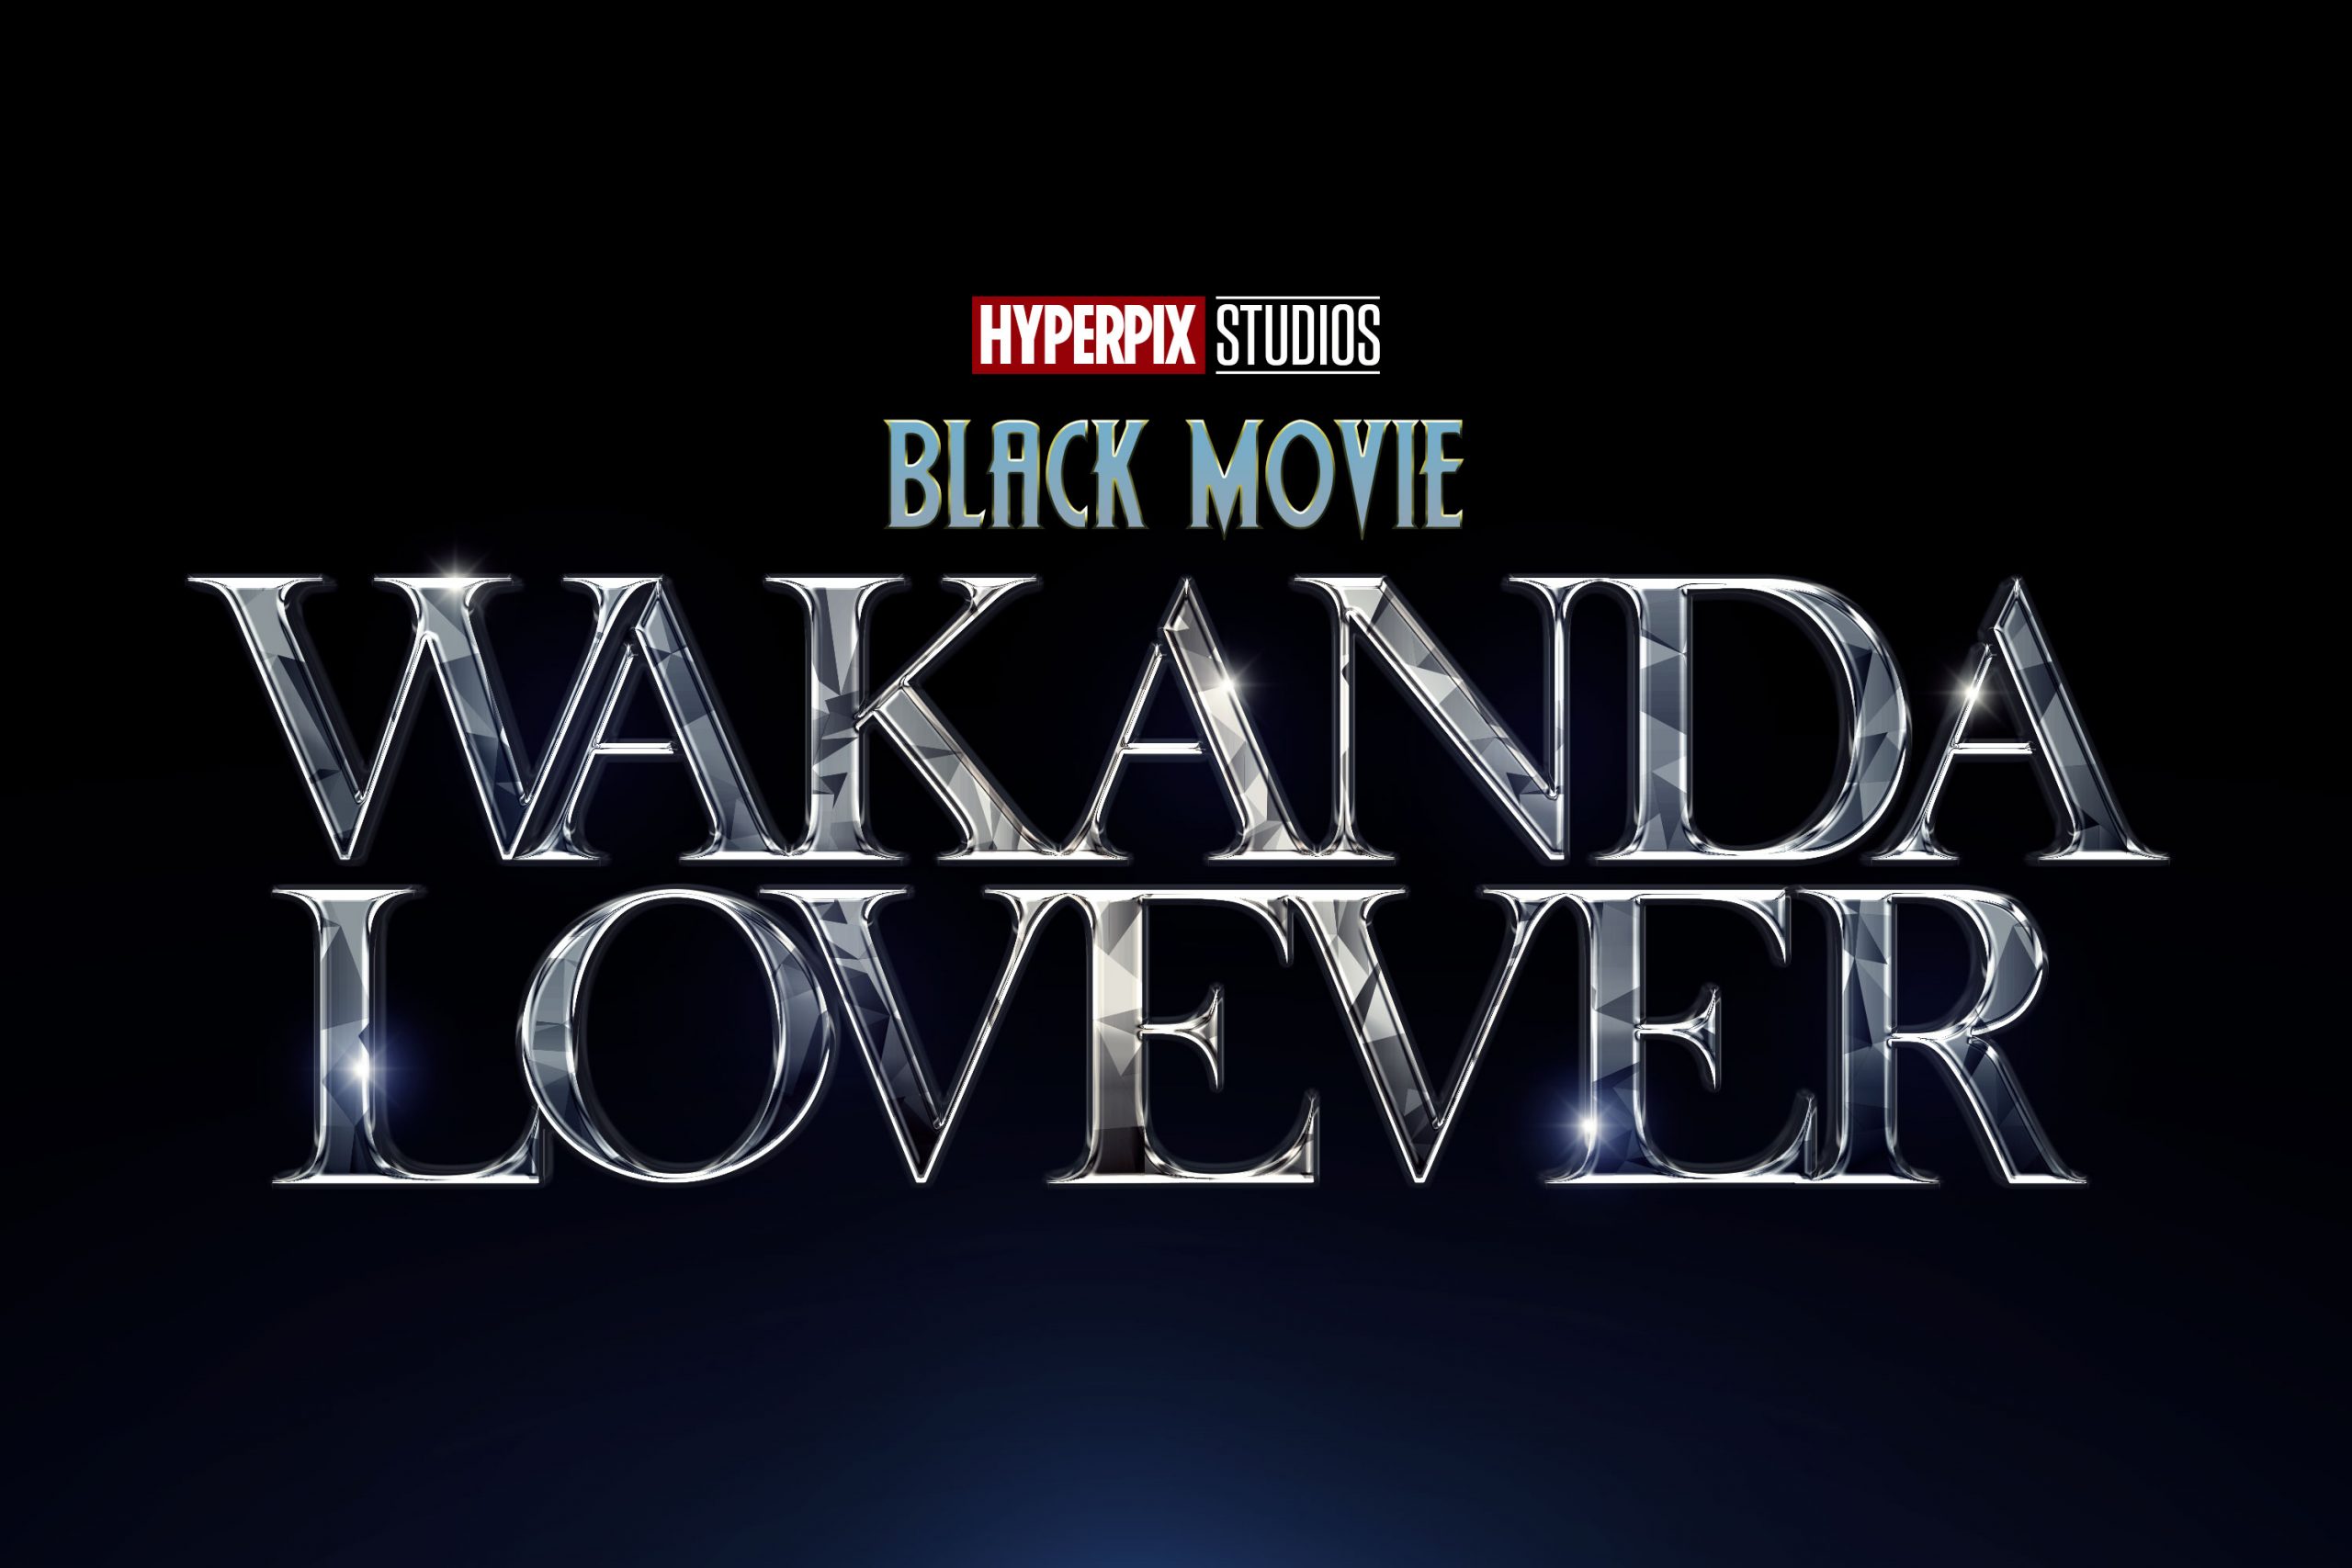 download the new Black Panther: Wakanda Forever